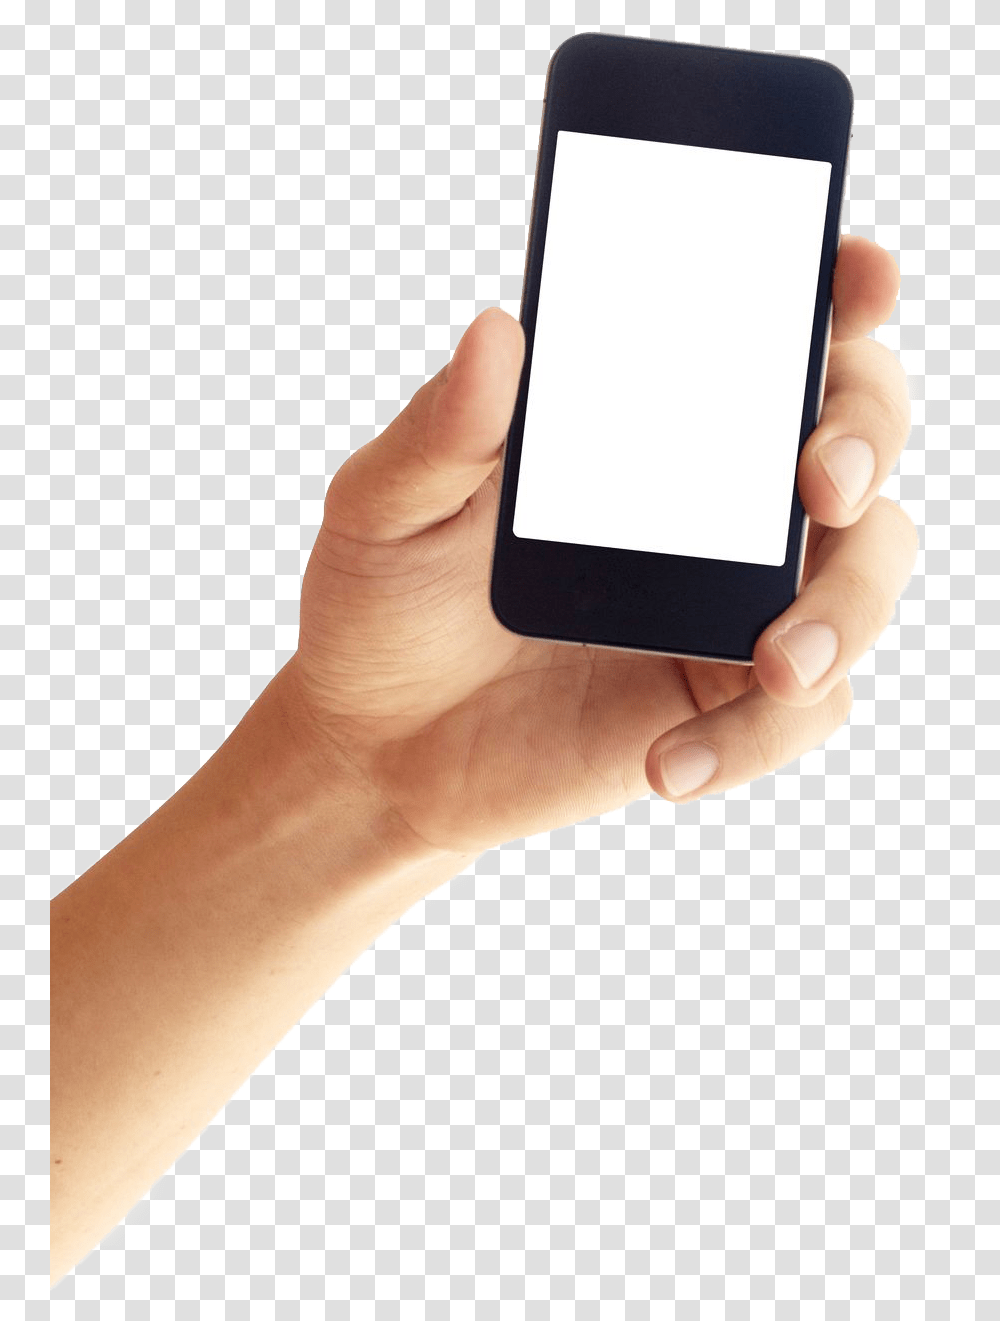 Download Phone In Hand Image For Free Central De Alarme Amt 1016 Net, Mobile Phone, Electronics, Cell Phone, Person Transparent Png